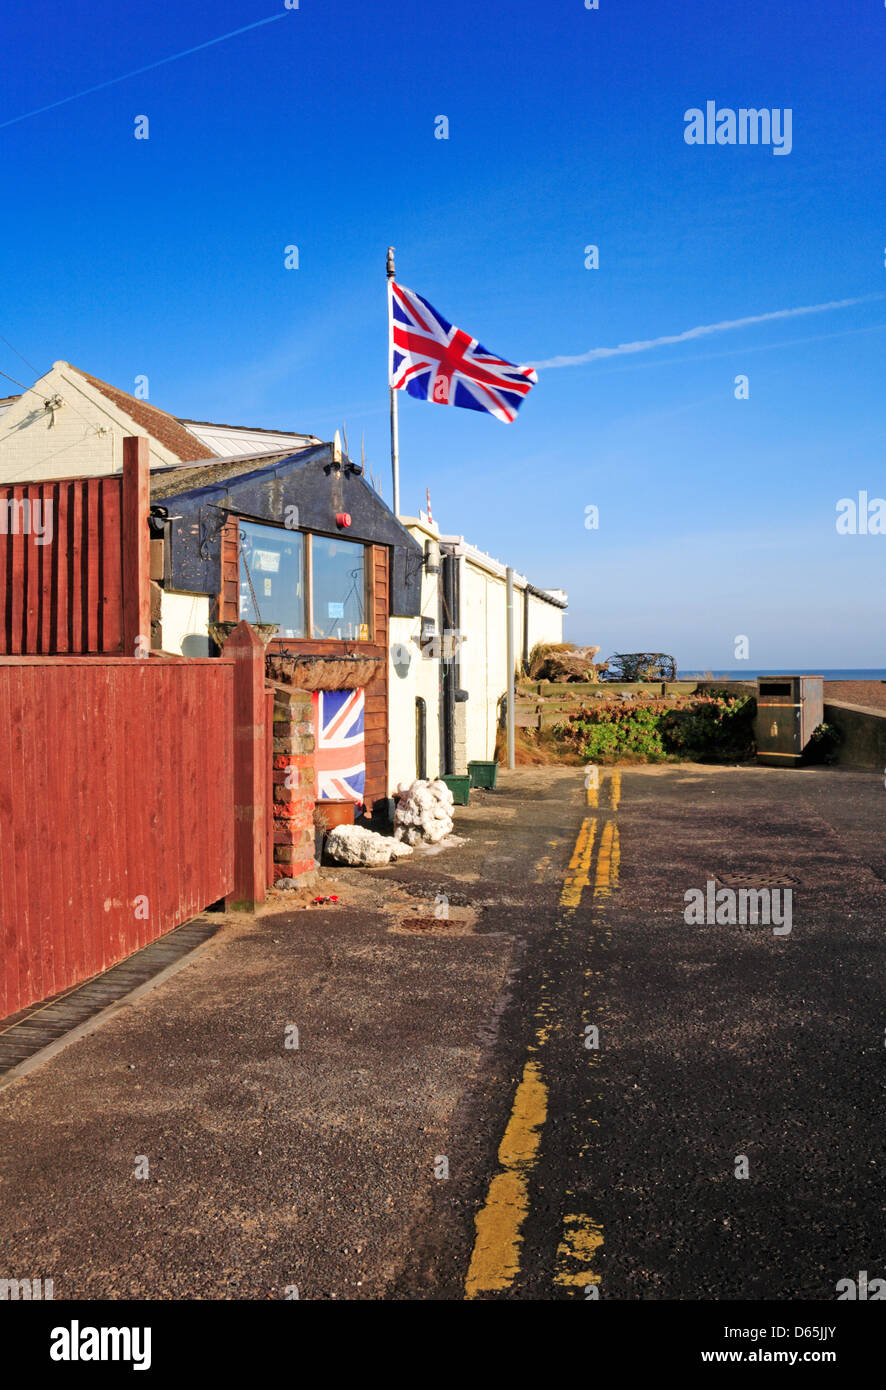 A small souvenir shop by the seawall at Bacton-on-Sea, Norfolk, England, United Kingdom. Stock Photo